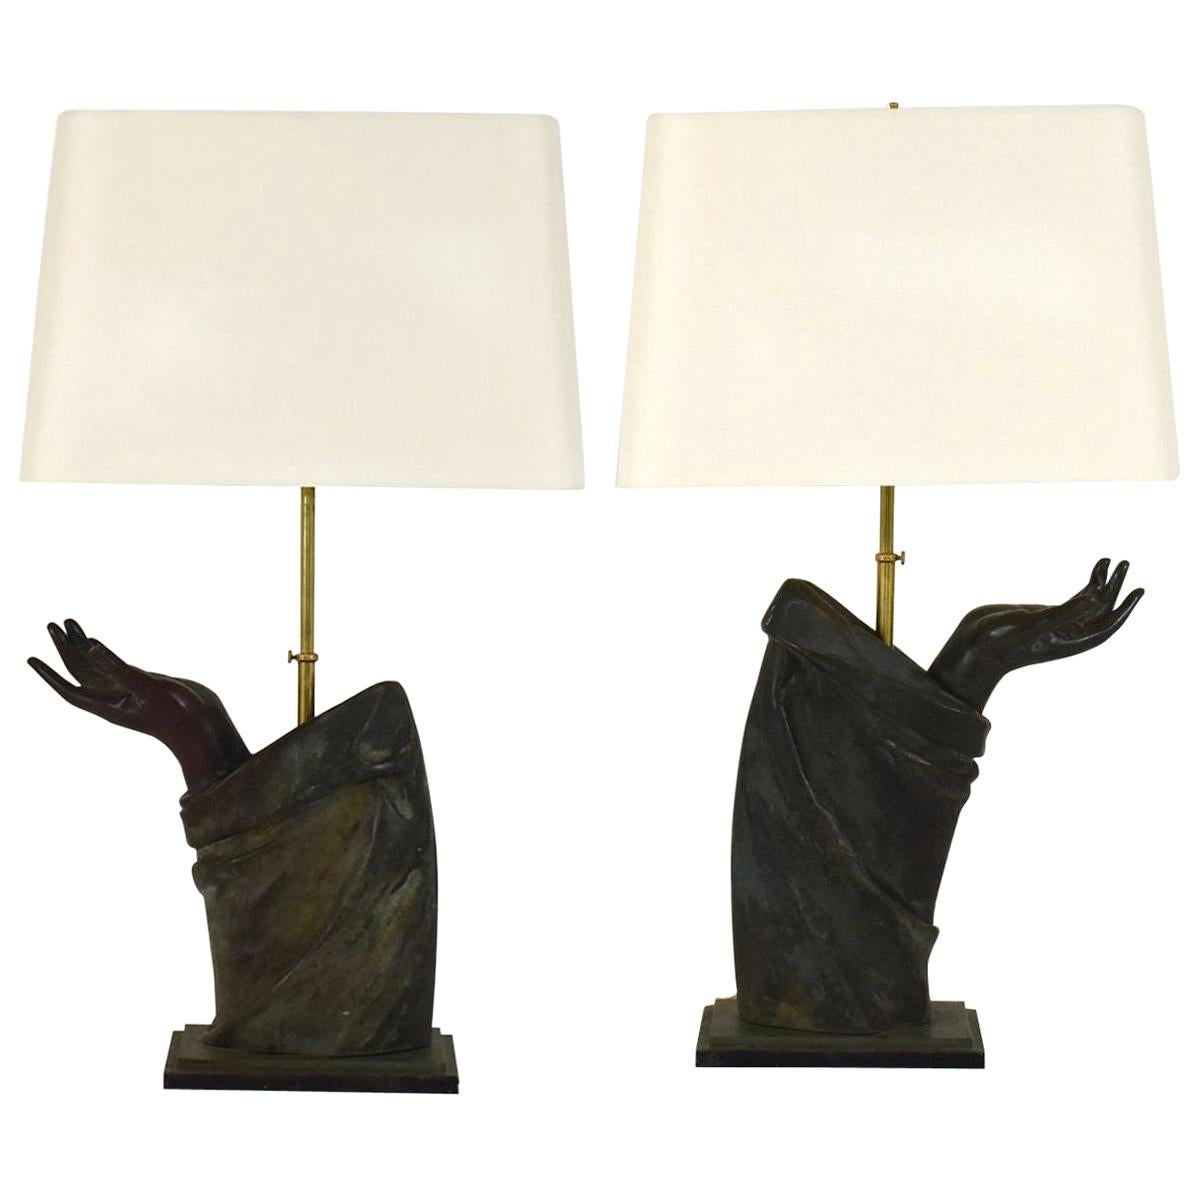 A sculptural pair of French bronze arm lamps with linen shades.